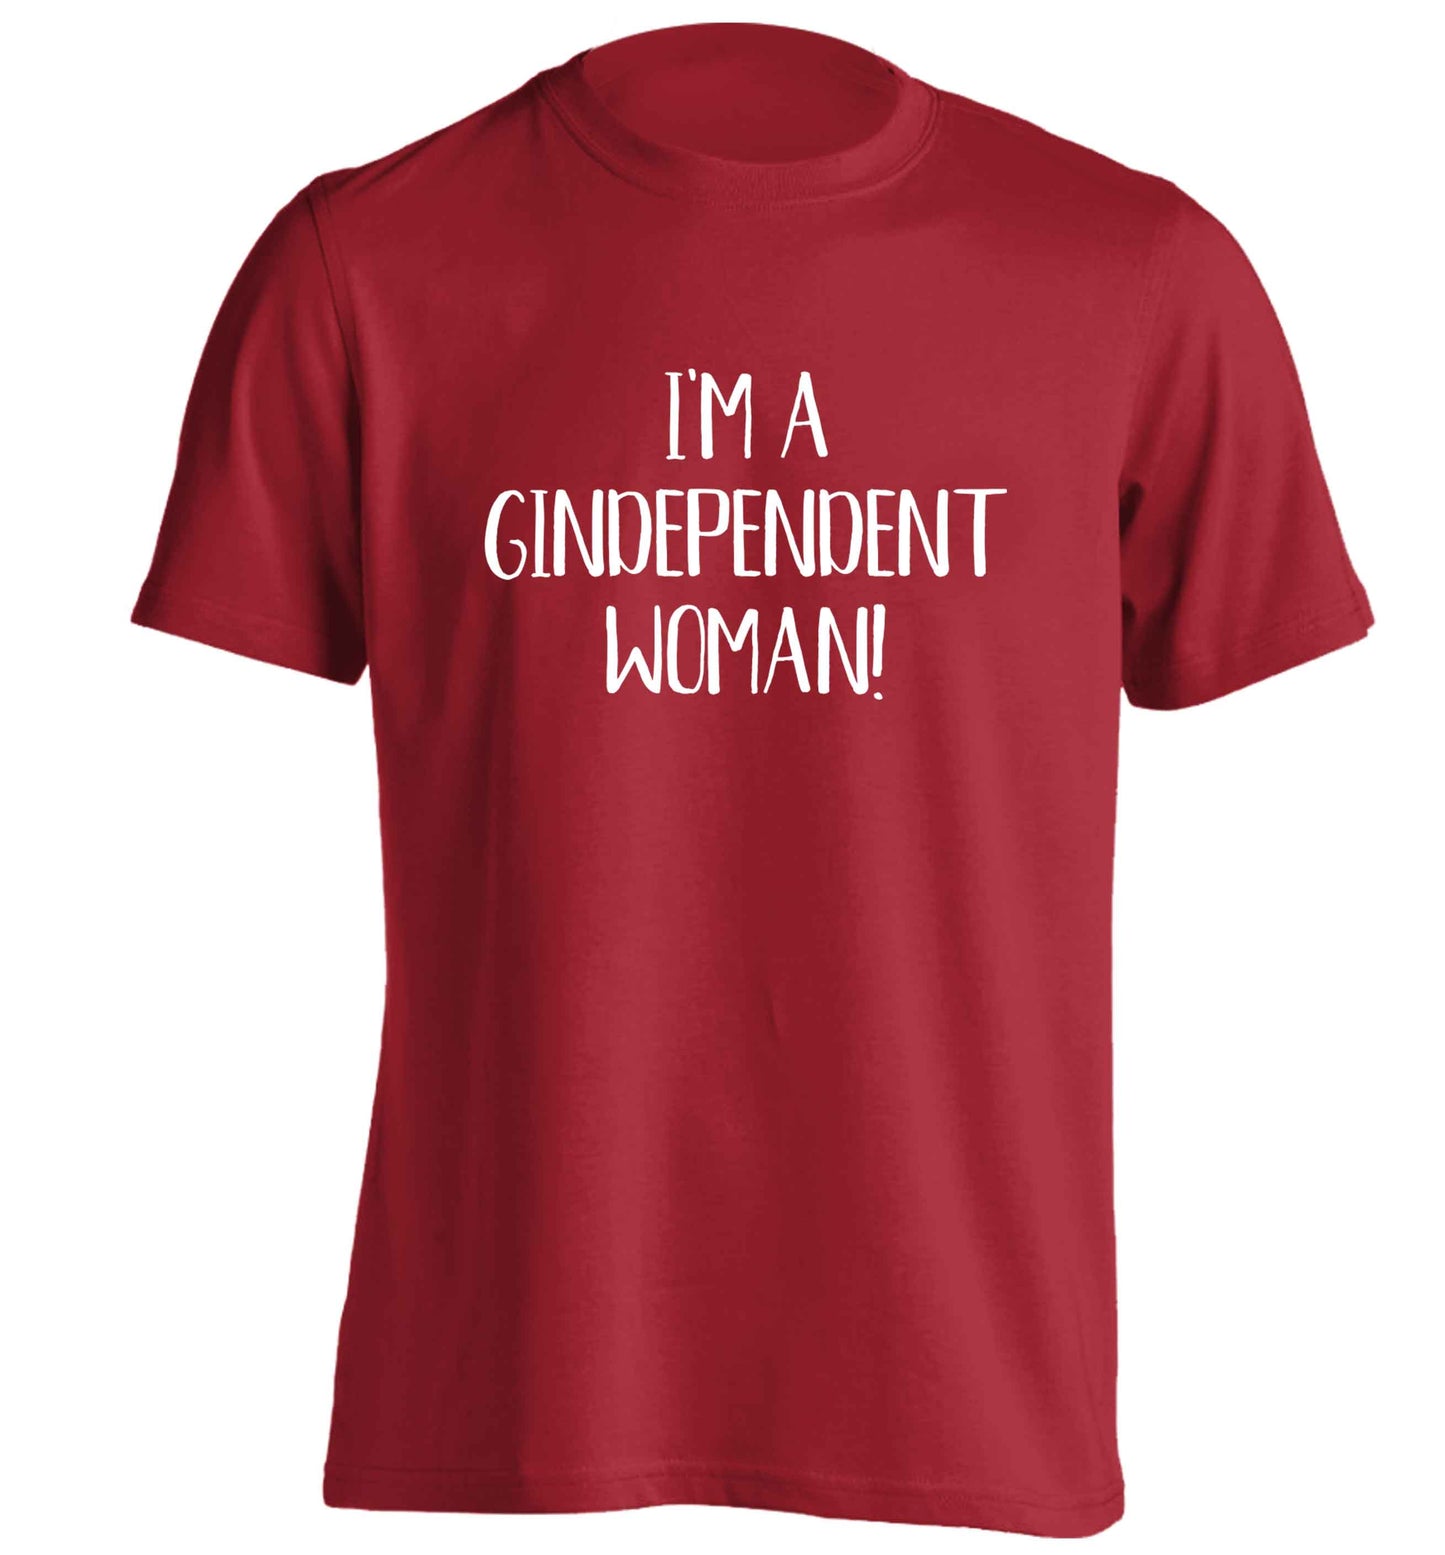 I'm a gindependent woman adults unisex red Tshirt 2XL